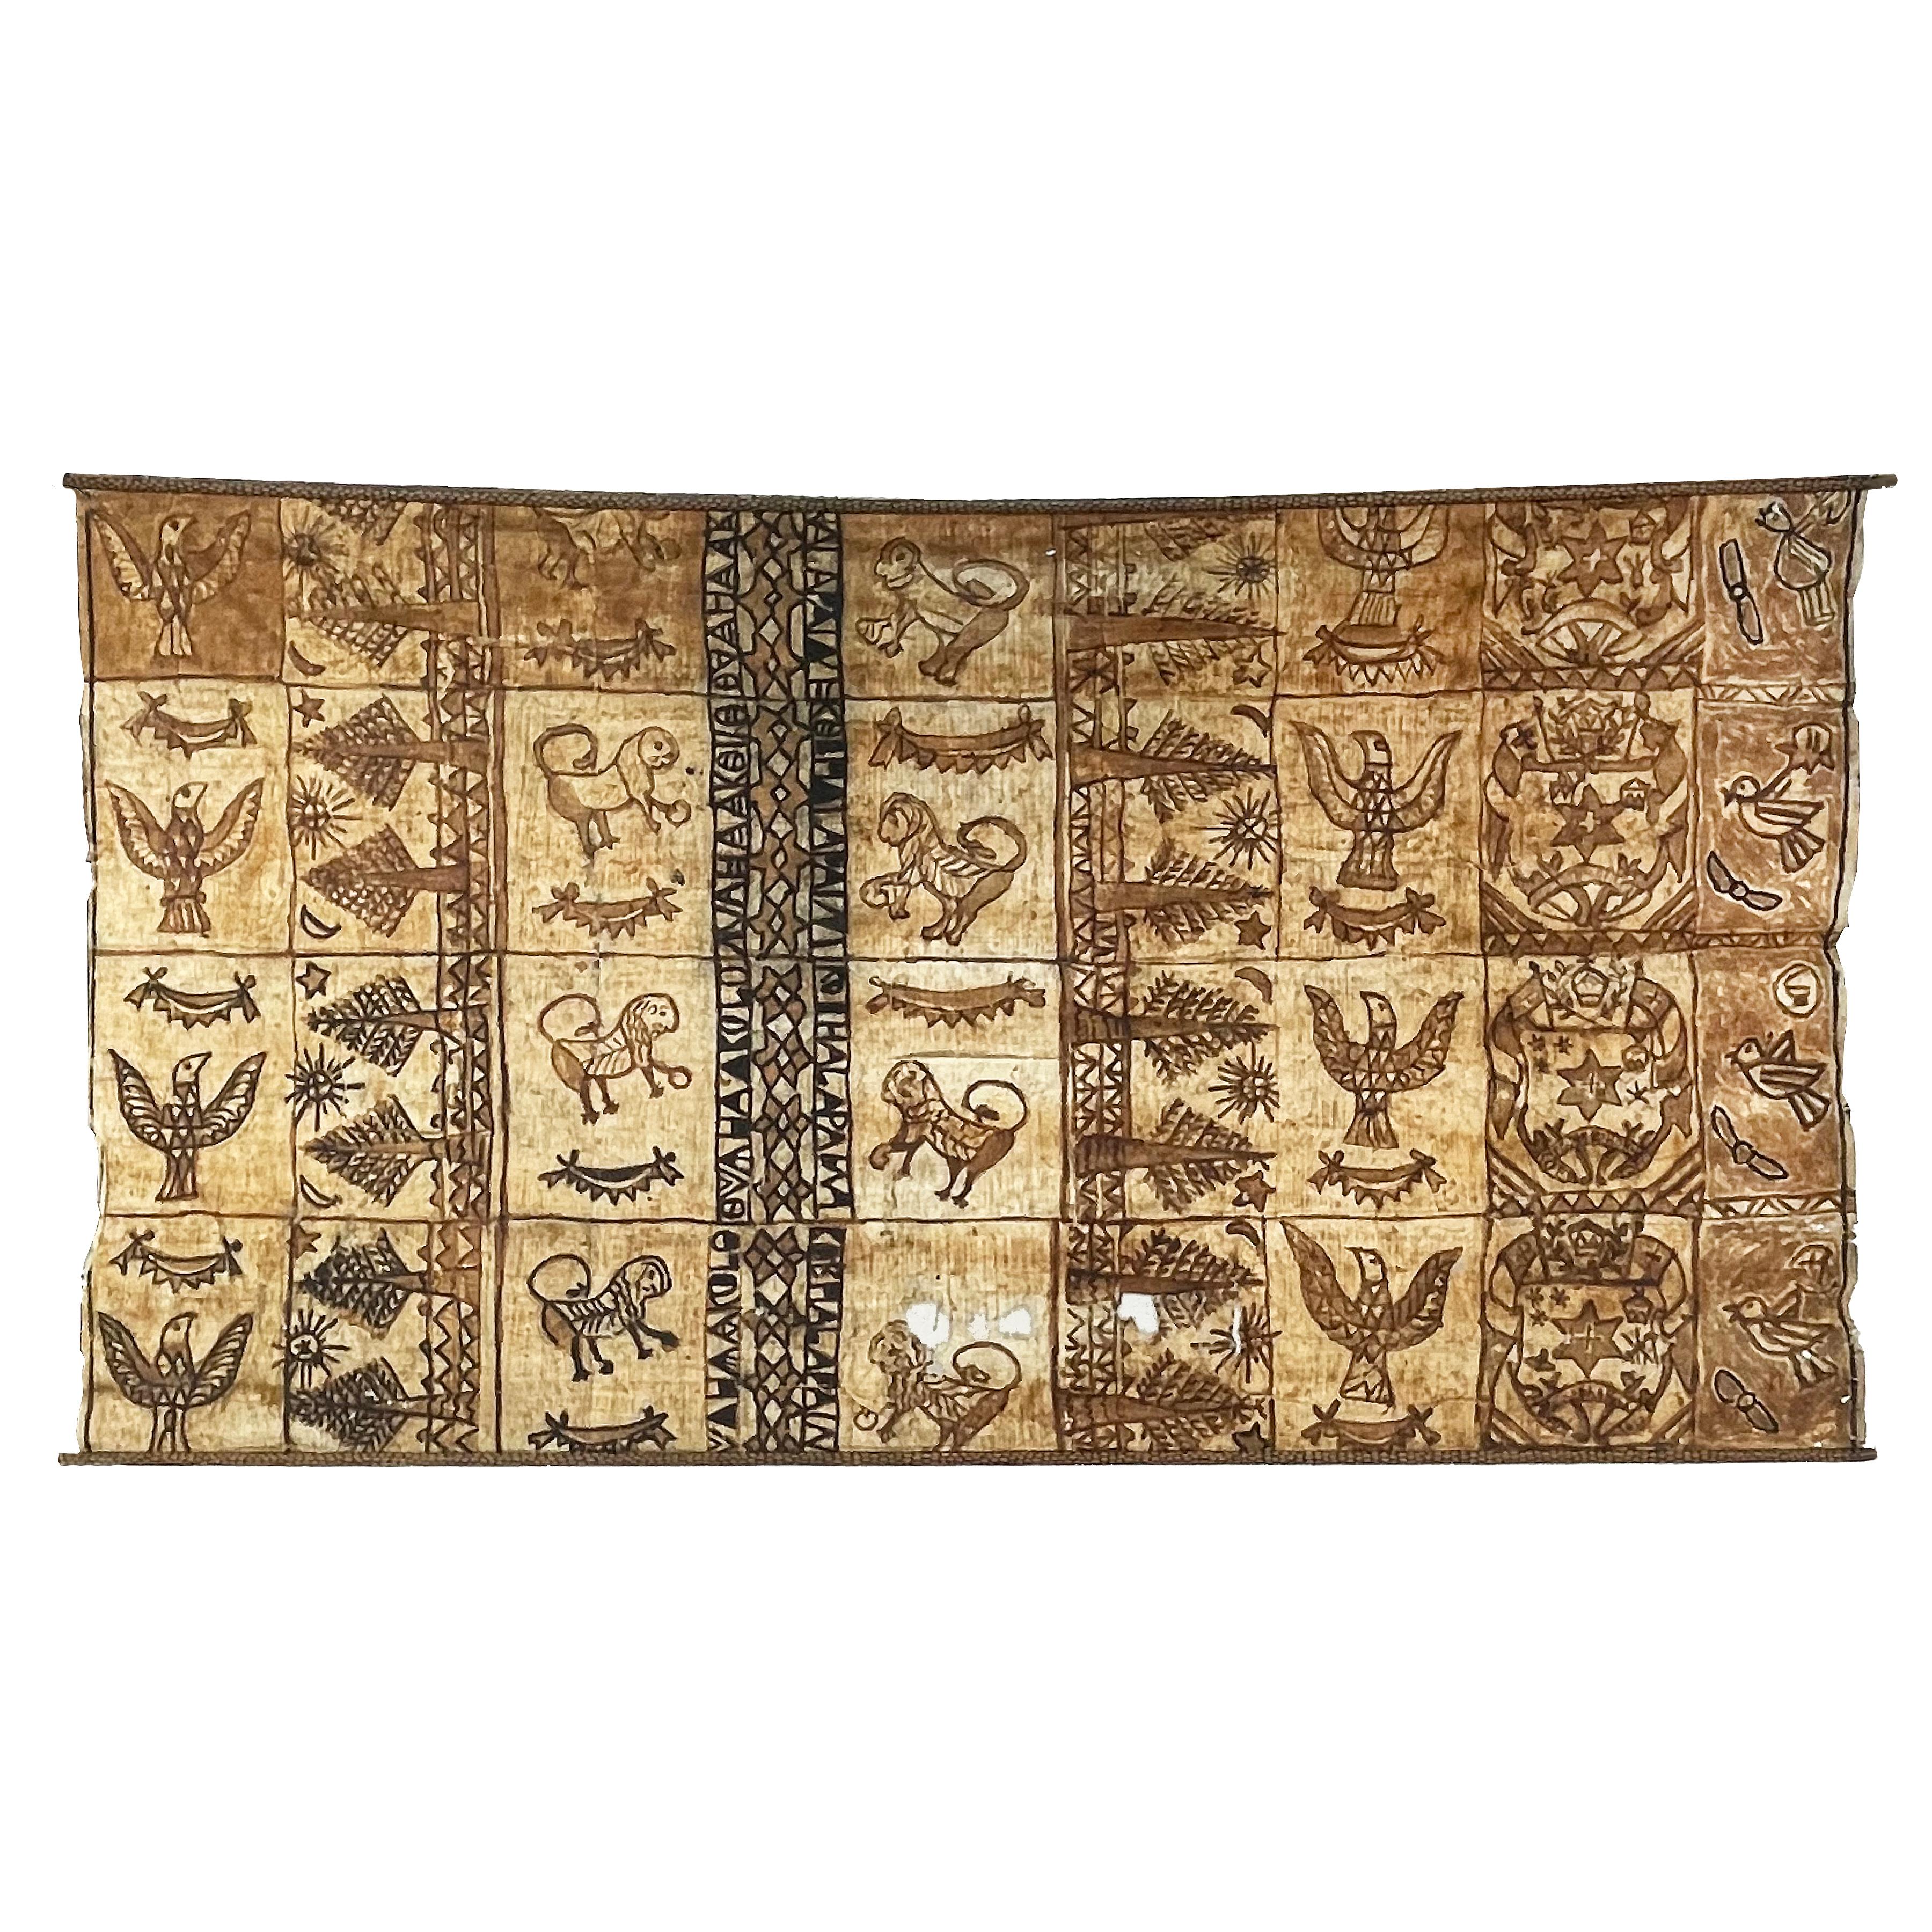 This impressive large example of Tapa cloth (or Ngatu) from Tonga is full of rich imagery including animals and a coat of arms. Dating to the Mid-20th Century it is made of the inner bark of the mulberry tree. Tapa was frequently used as a